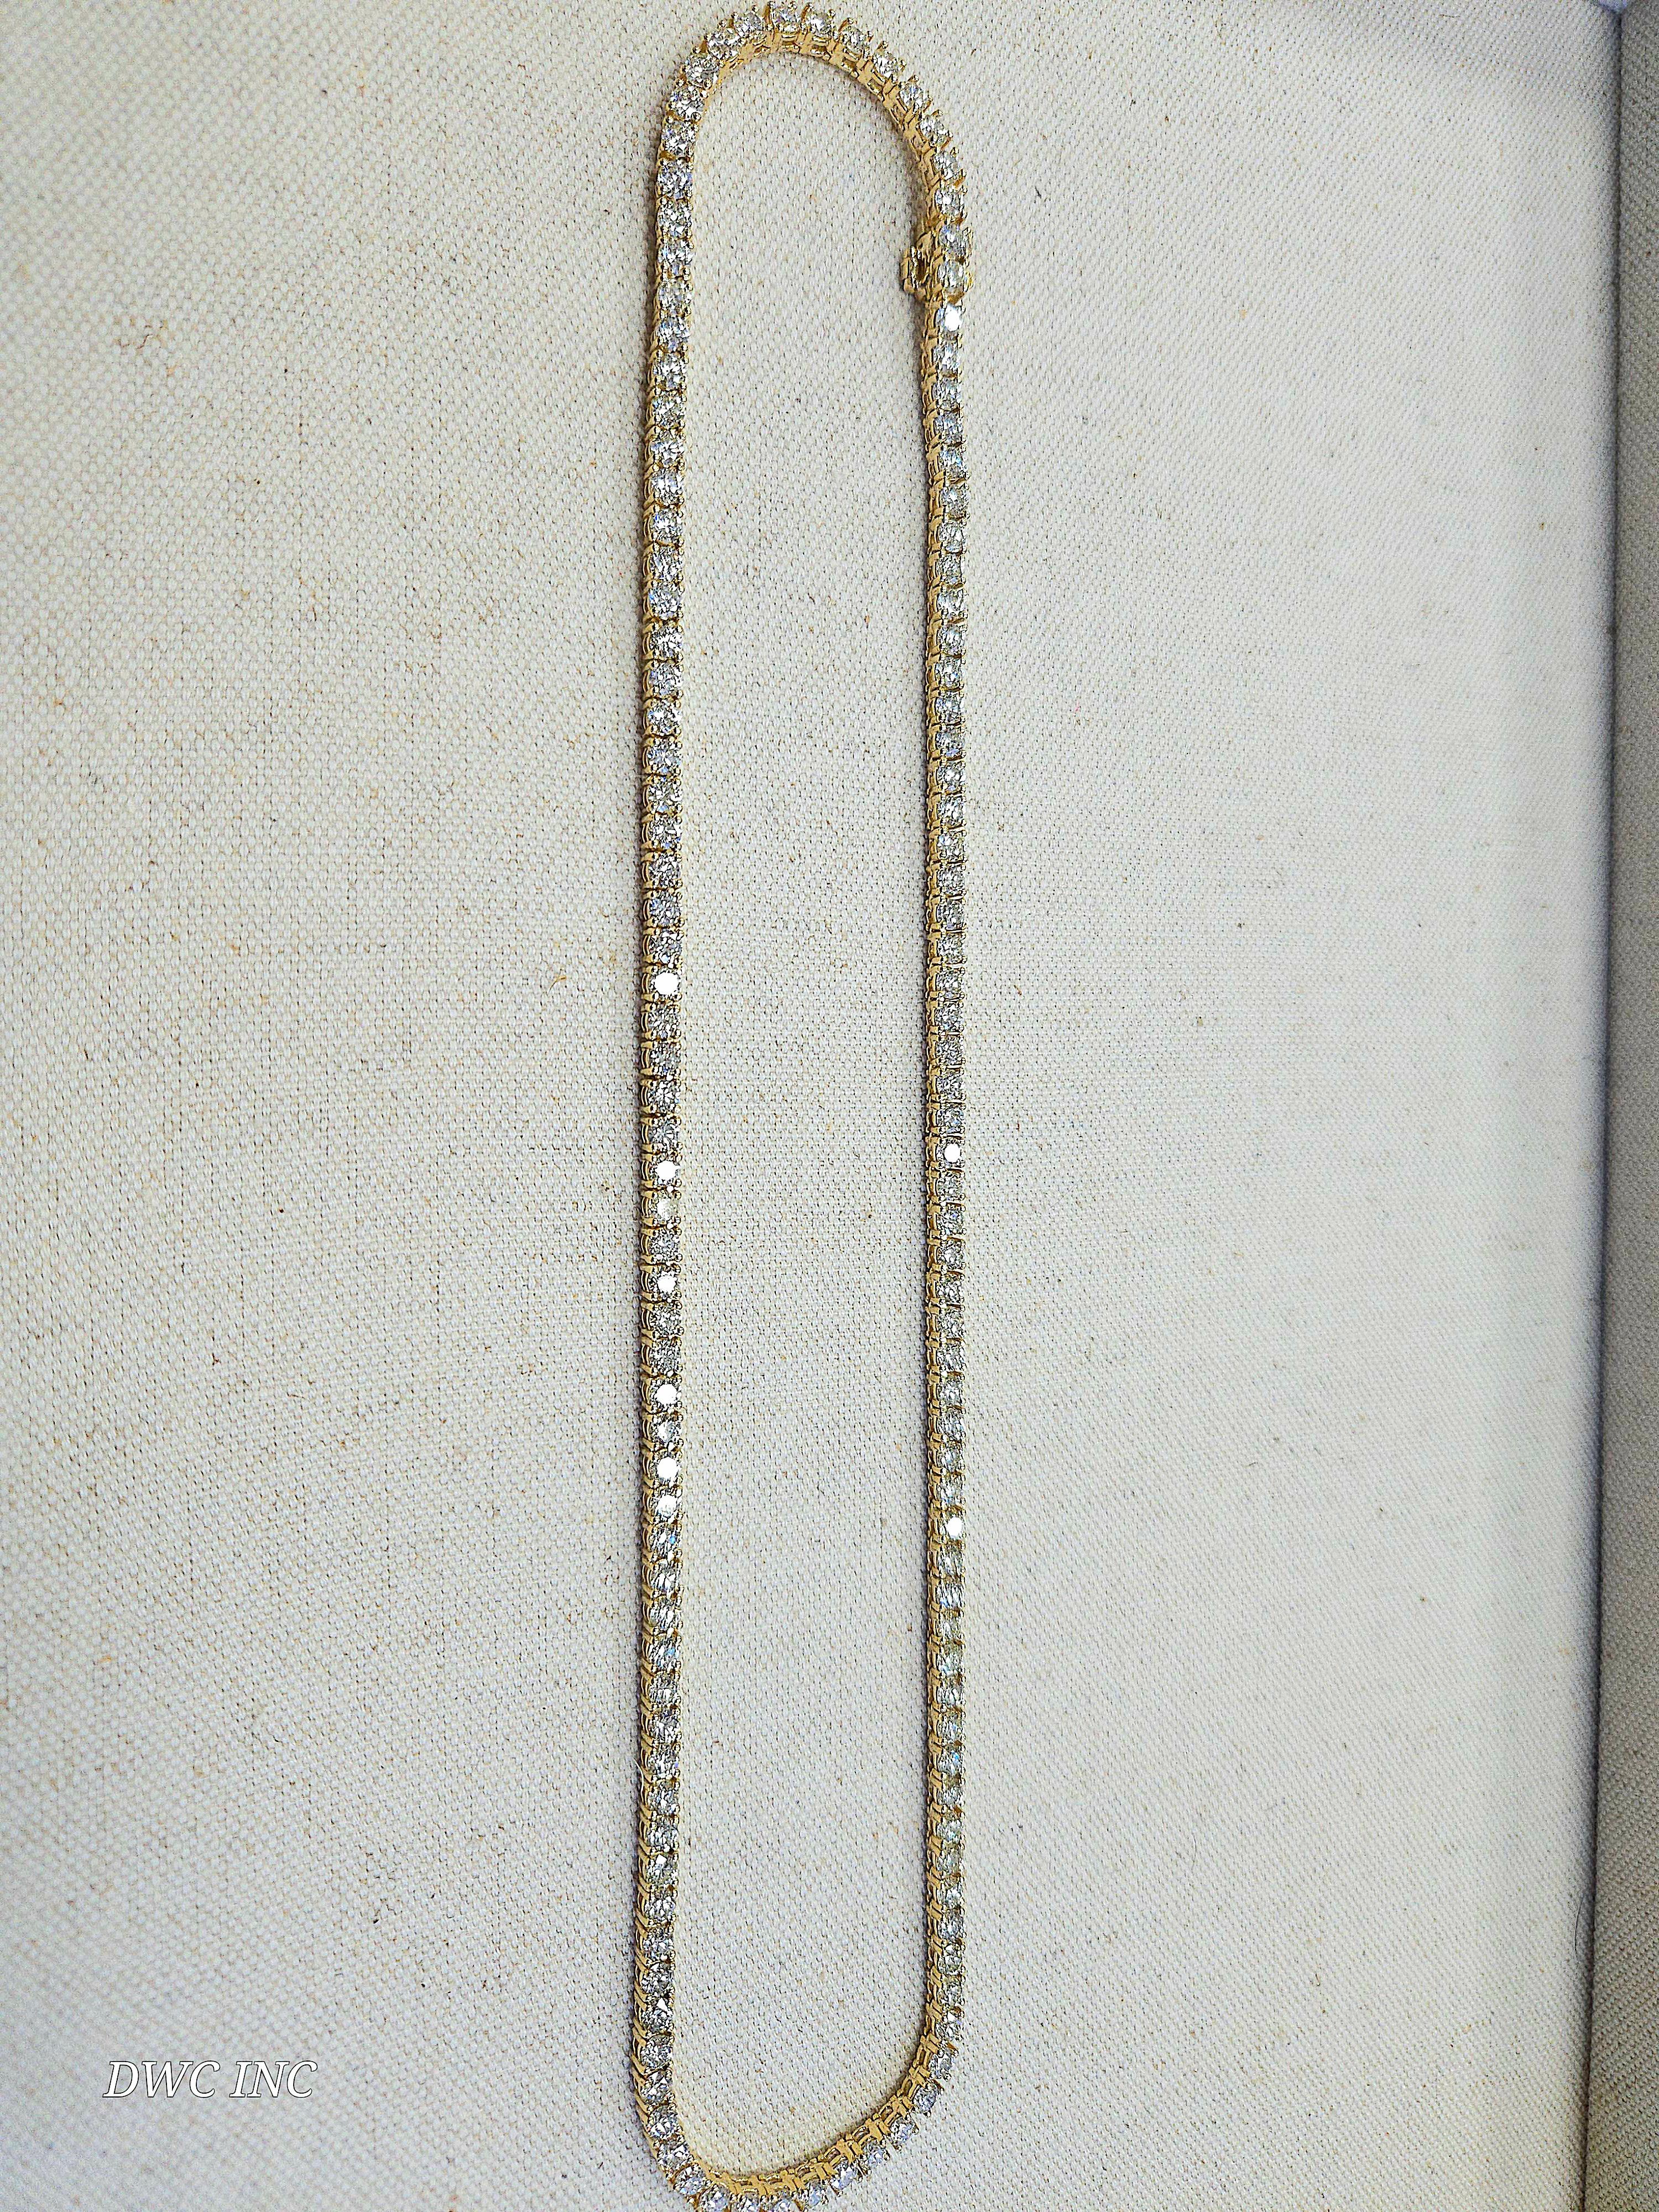 22.35 Carat Brilliant Cut Diamond Tennis Necklace 14 Karat Yellow Gold 20'' In New Condition For Sale In Great Neck, NY